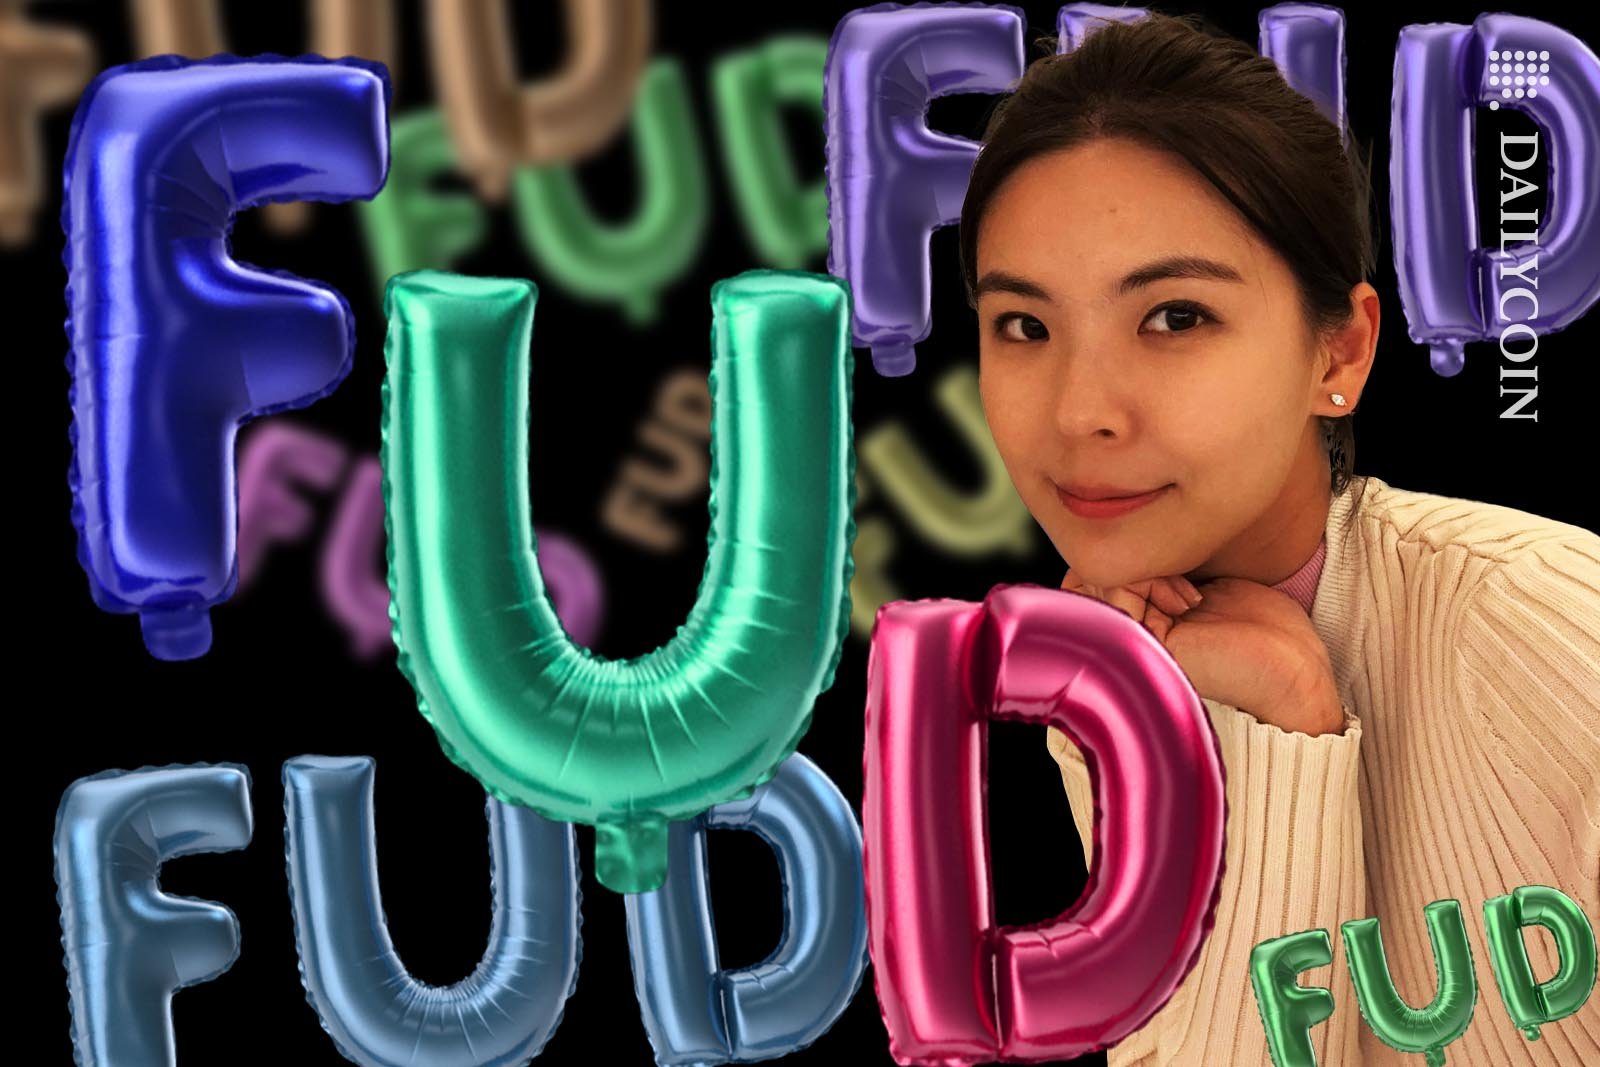 Gracy Chen smiling, surrounded by balloon letters spelling out FUD.